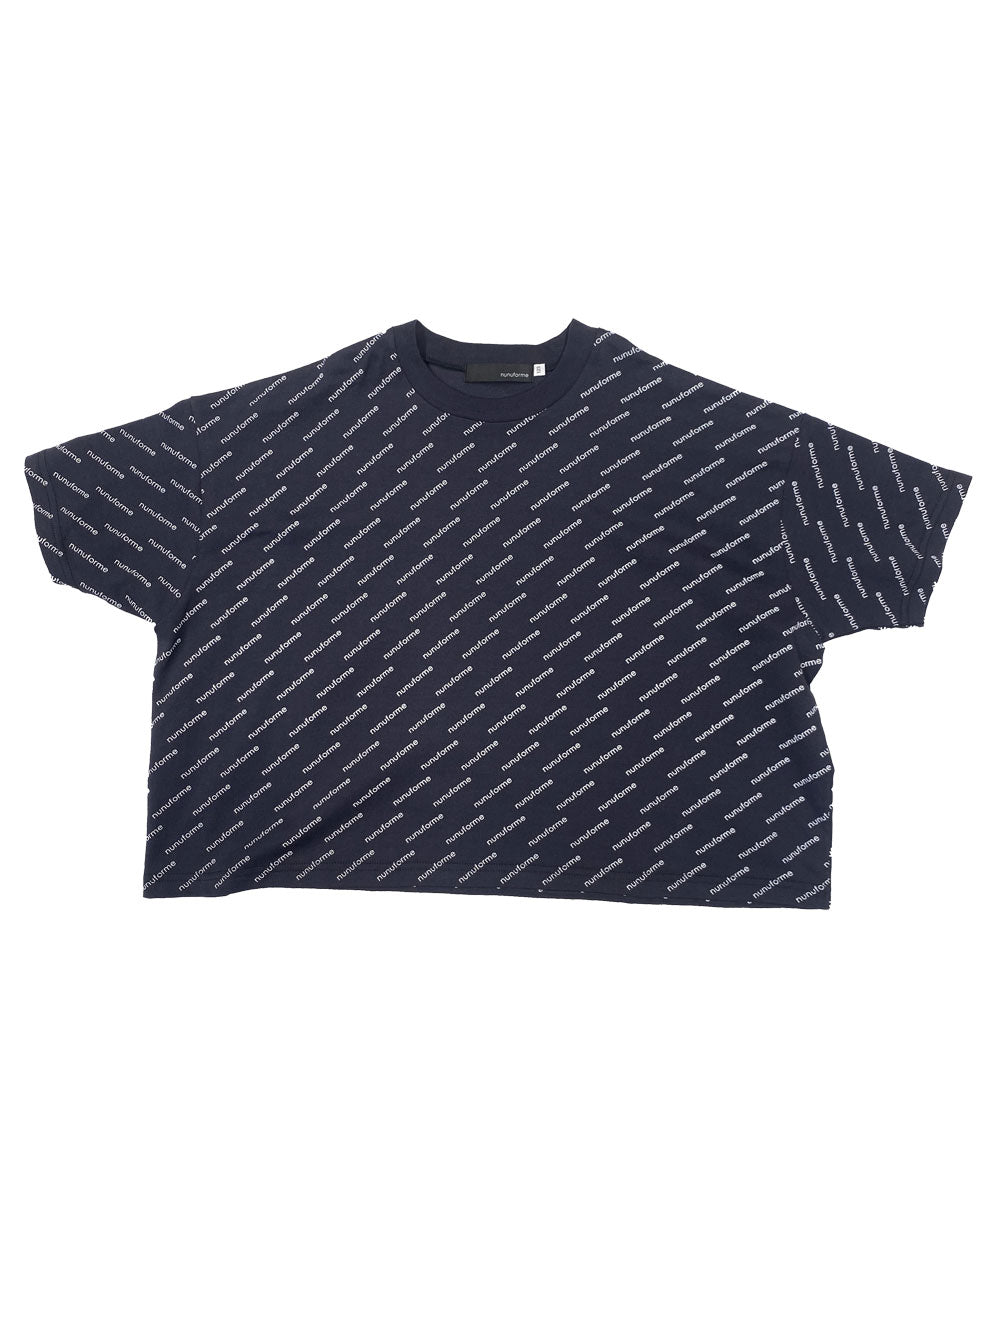 All-Over Logo Charcoal T-Shirt